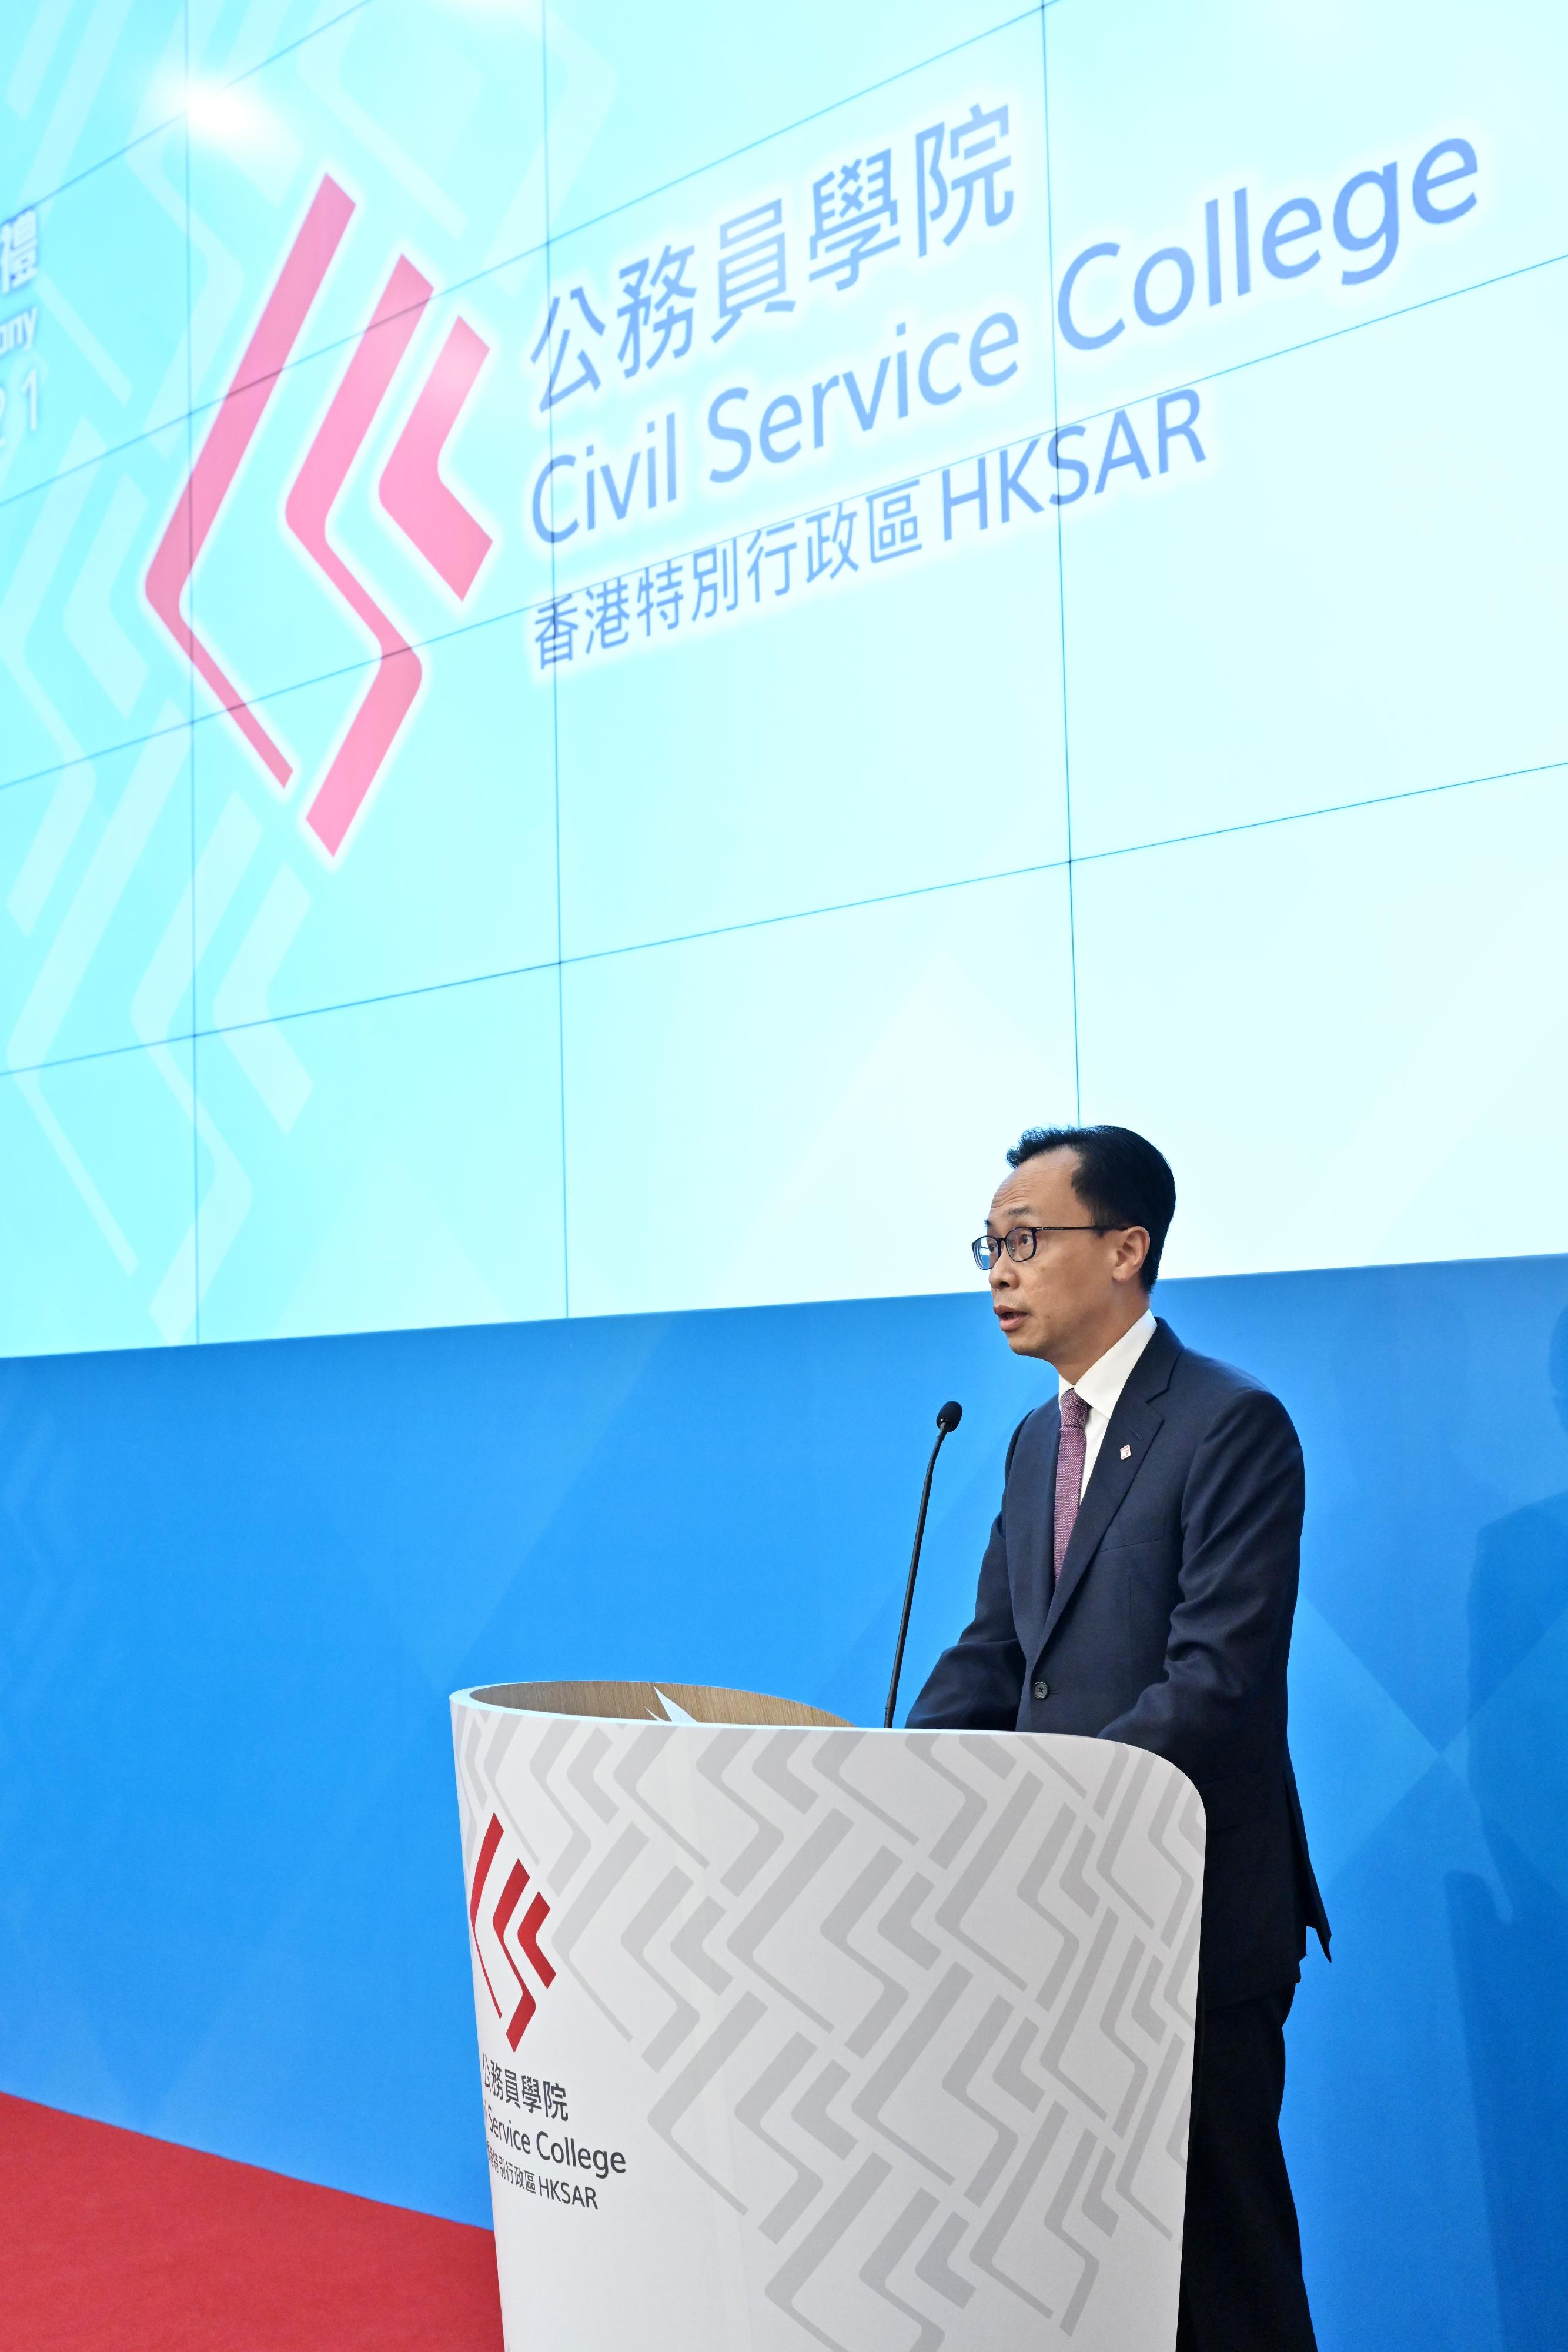 The Civil Service College of the Hong Kong Special Administrative Region was established today (December 9), marking a new milestone for training and development for the civil service. Photo shows the Secretary for the Civil Service, Mr Patrick Nip, delivering a speech at the establishment ceremony. 